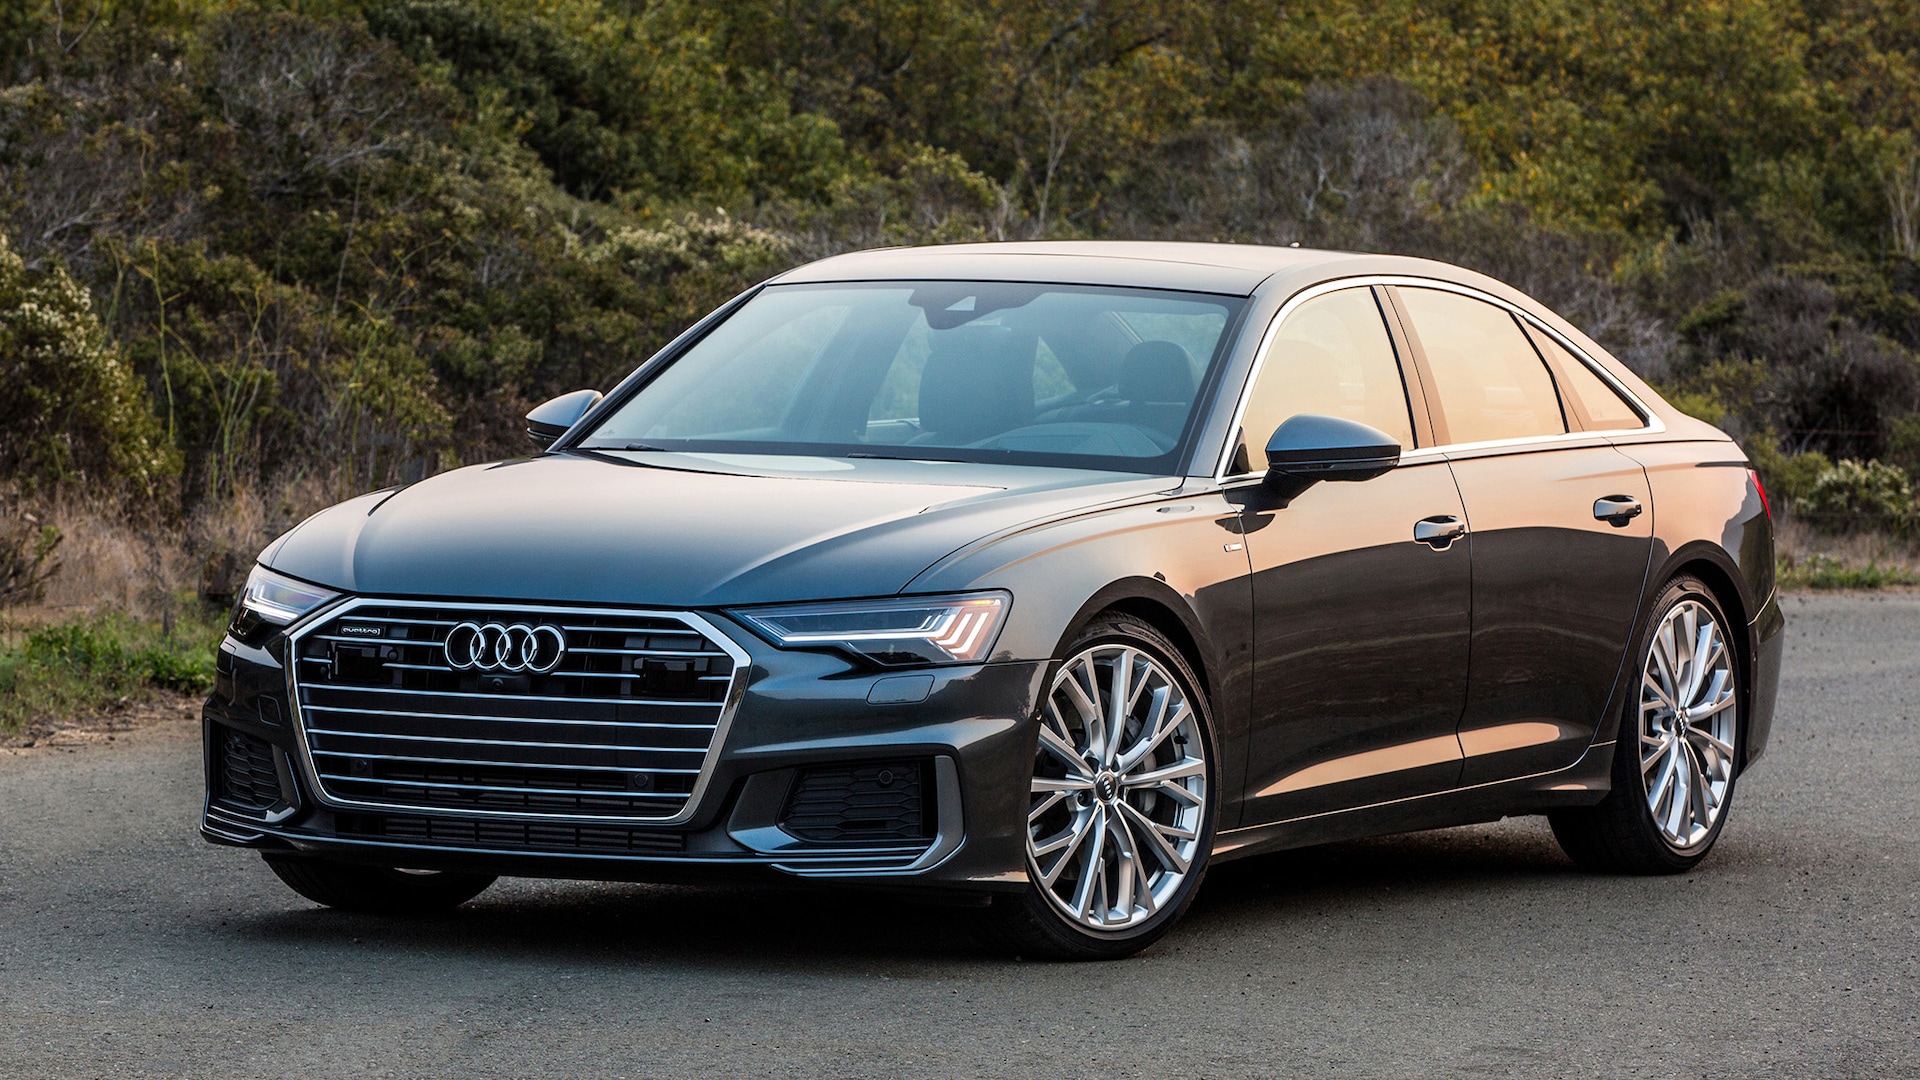 2022 Audi A6 Prices, Reviews, and Photos - MotorTrend